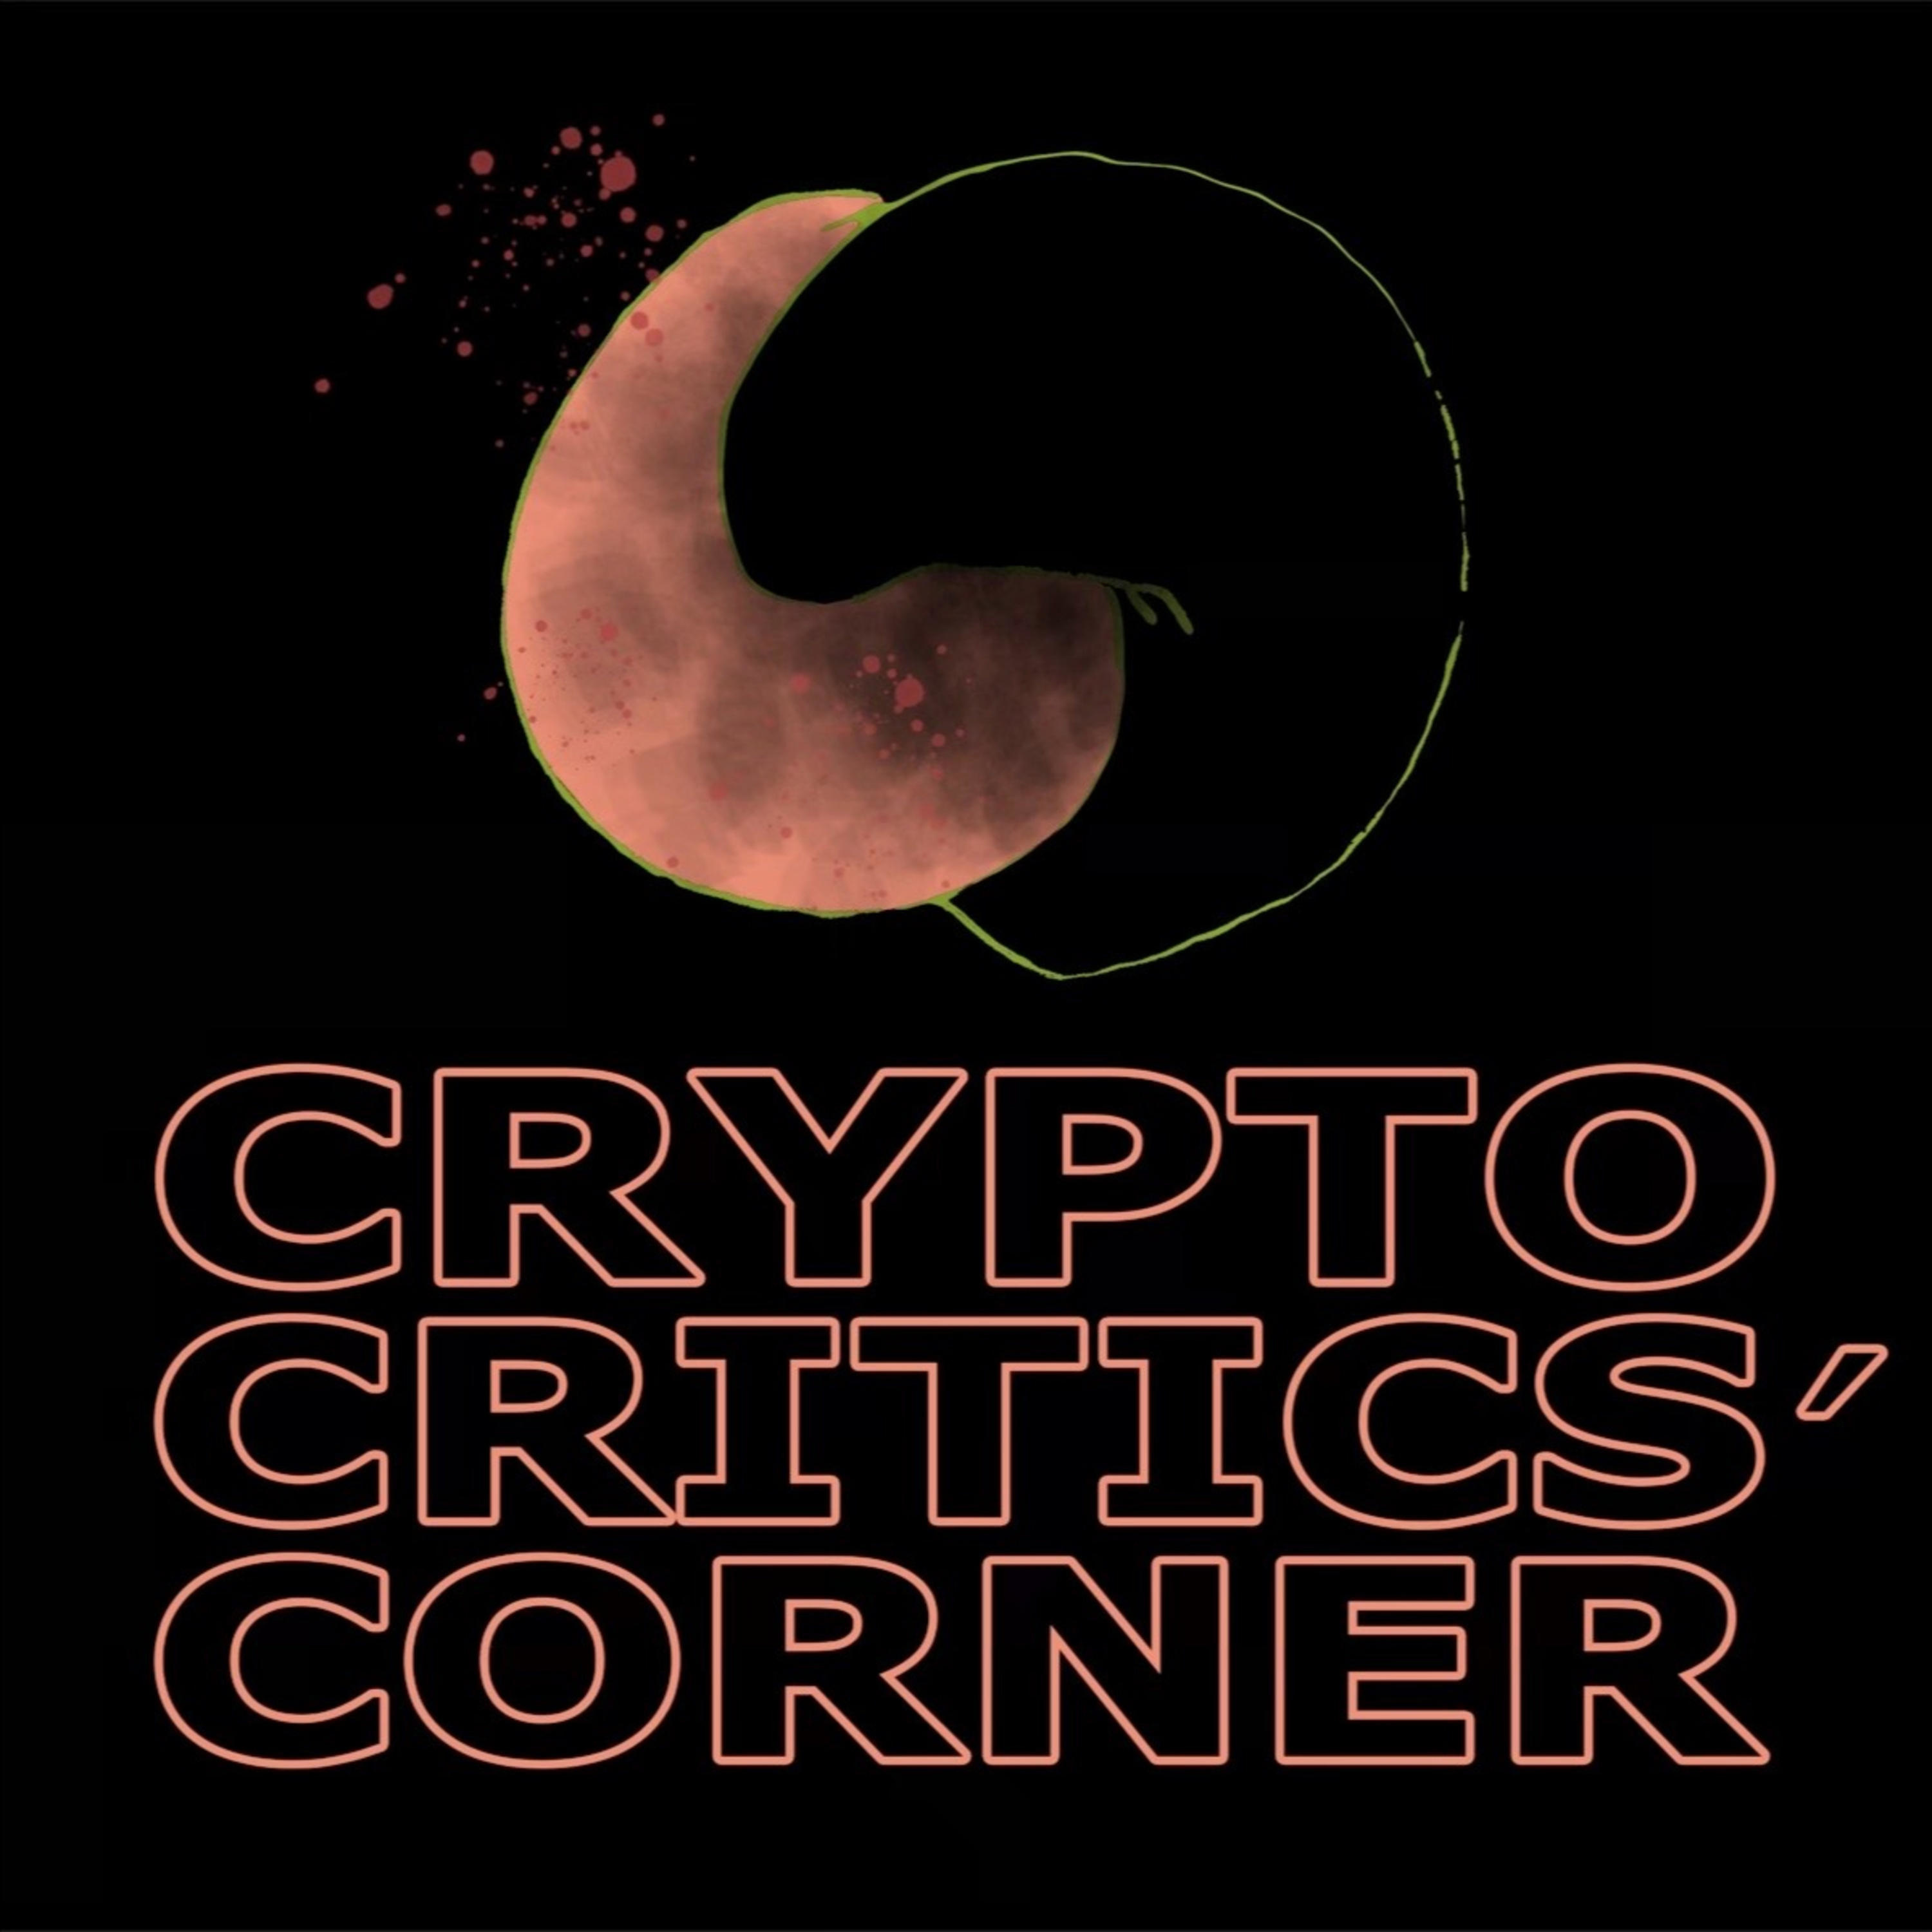 Fresh update on "elections committee" discussed on Crypto Critics' Corner